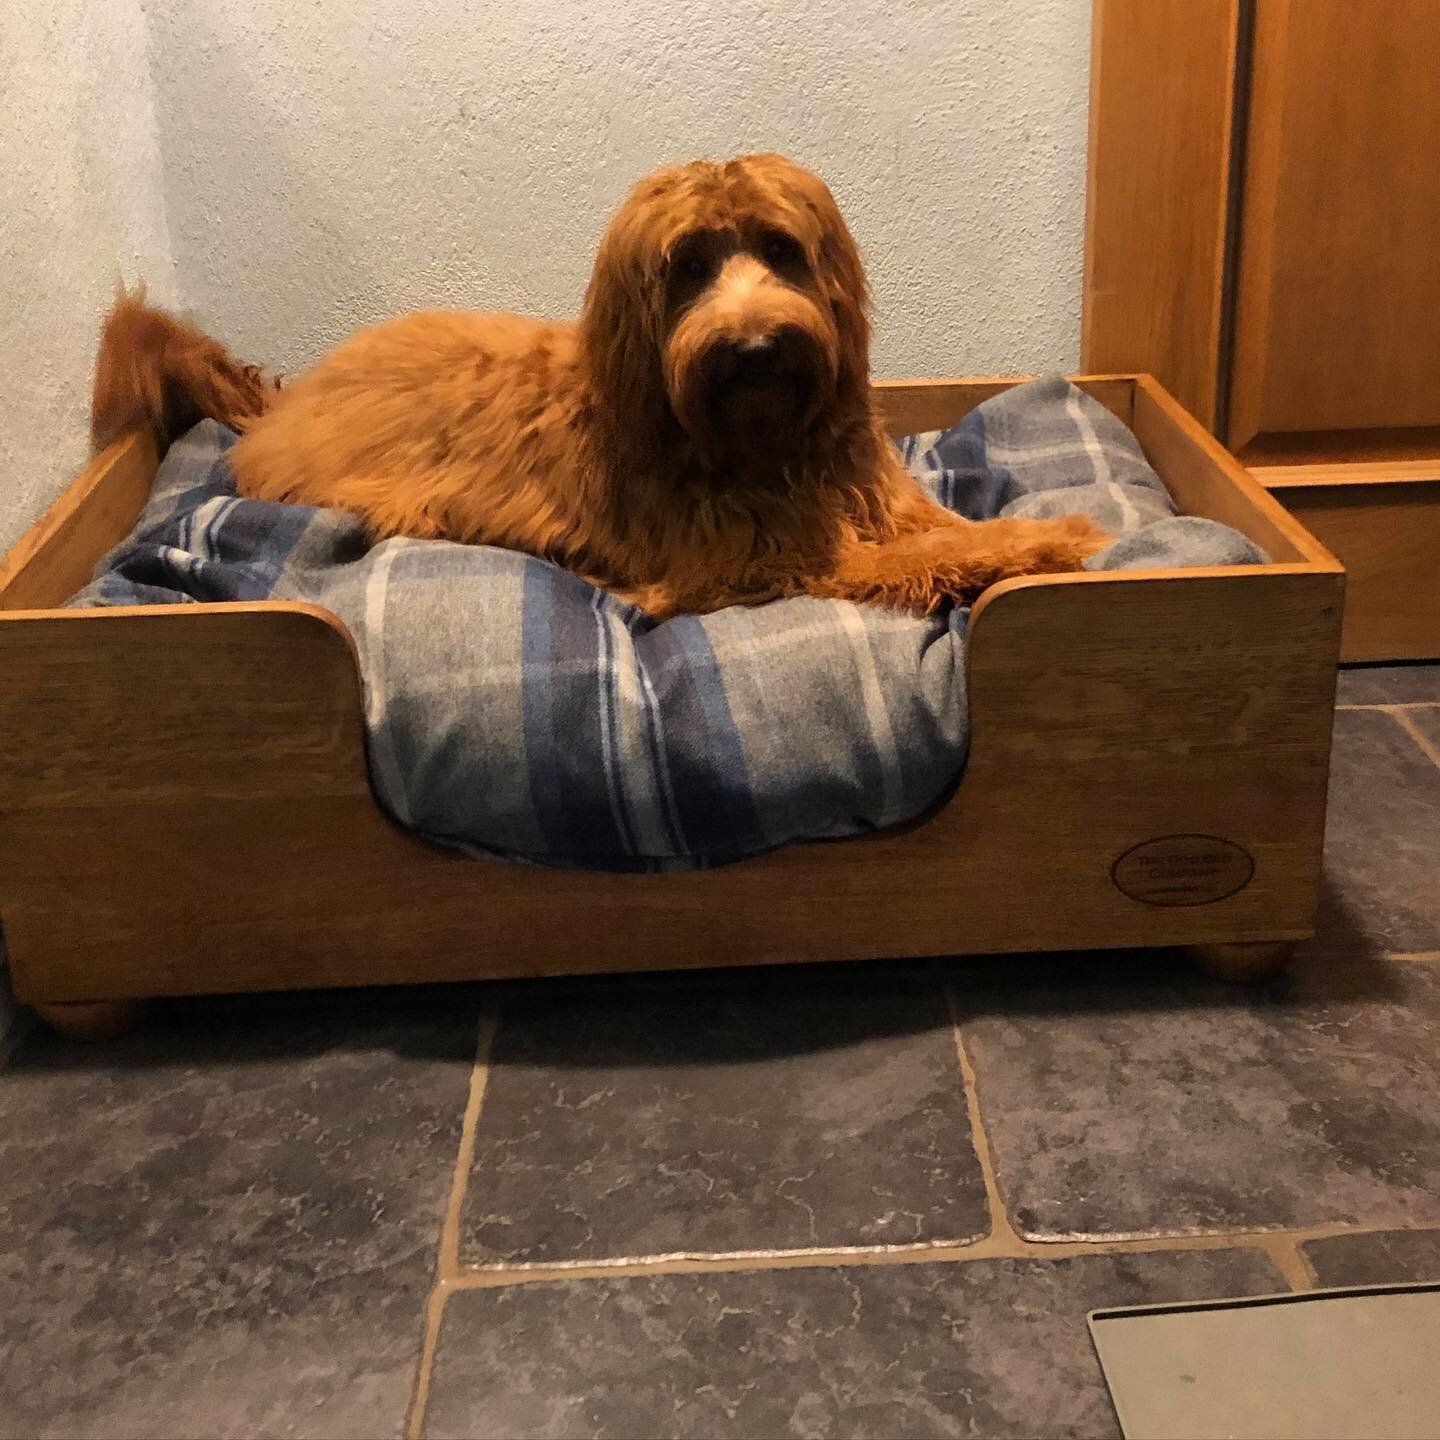 Winnie appreciating her raised bed. You wouldn&rsquo;t want to sleep on a cold floor #woodendogbed #raiseddogbed #luxurydogbed #cosydog #countryhouses #happydog #dogsofinstagram